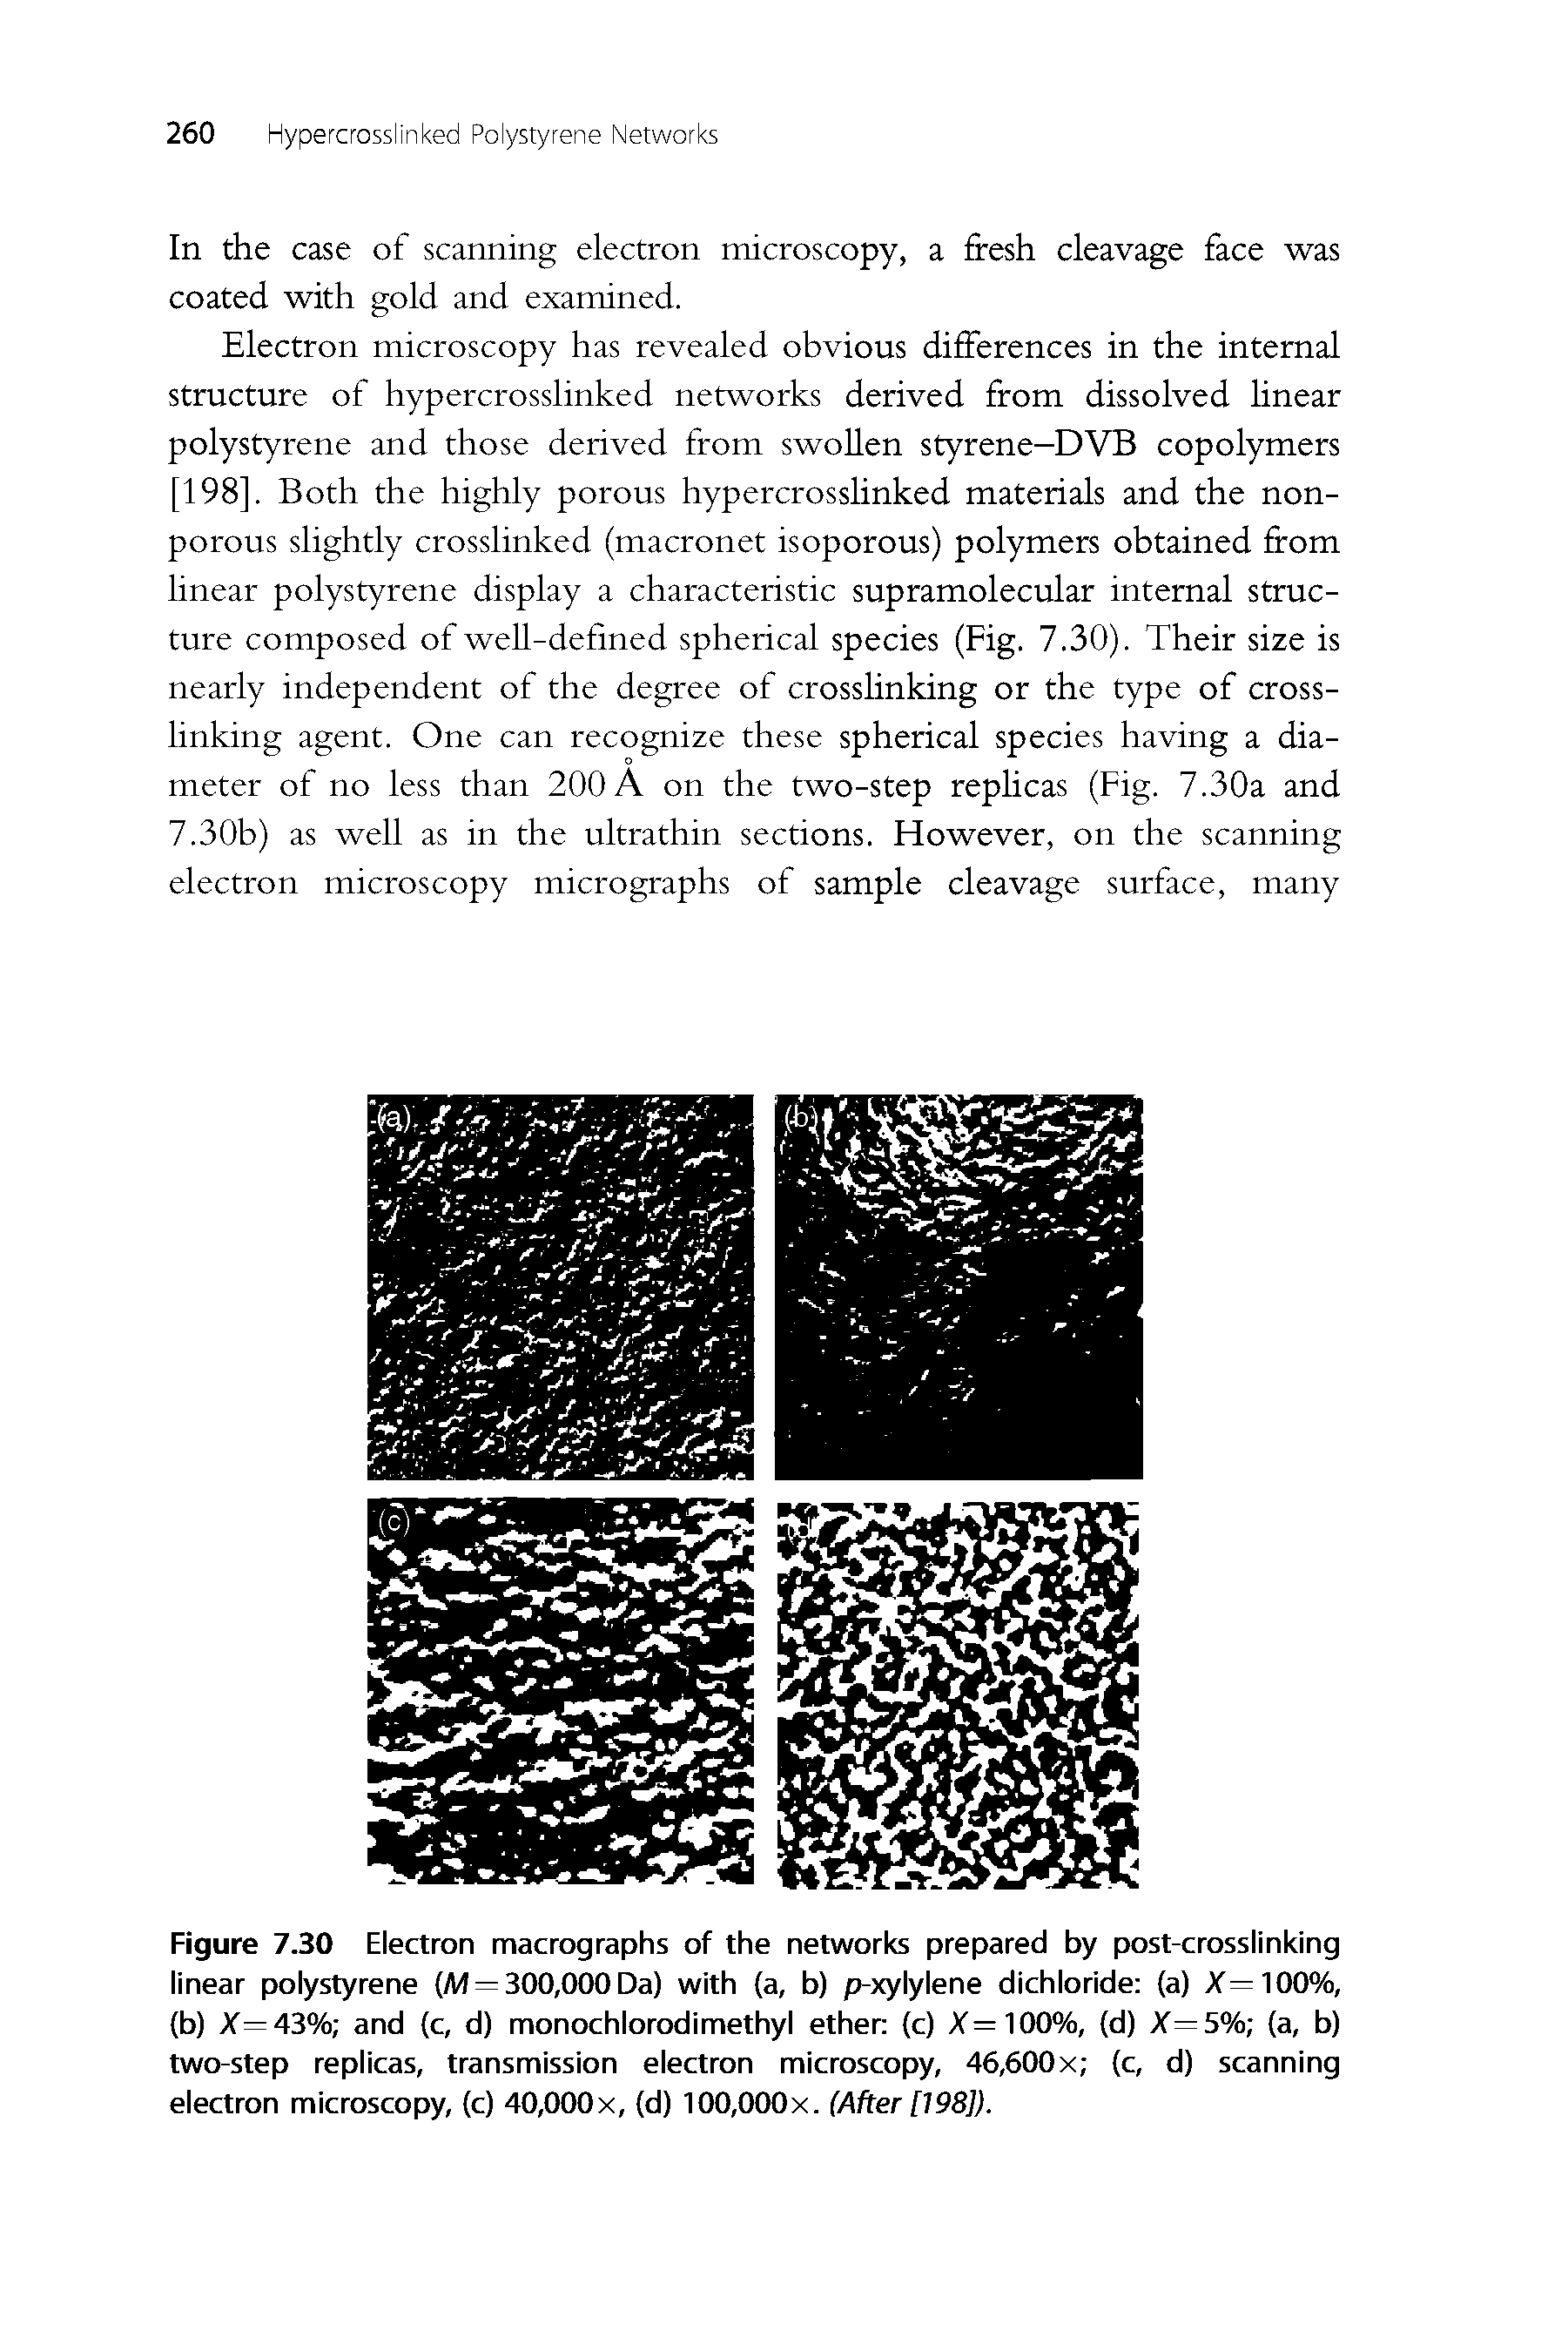 Figure 7.30 Electron macrographs of the networks prepared by post-crosslinking linear polystyrene (/M = 300,000 Da) with (a, b) p-xylylene dichloride (a) X=100%, (b) X=43% and (c, d) monochlorodimethyl ether (c) X=100%, (d) X=5% (a, b) two-step replicas, transmission electron microscopy, 46,600x (c, d) scanning electron microscopy, (c) 40,000x, (d) 100,000x. (After [198]).